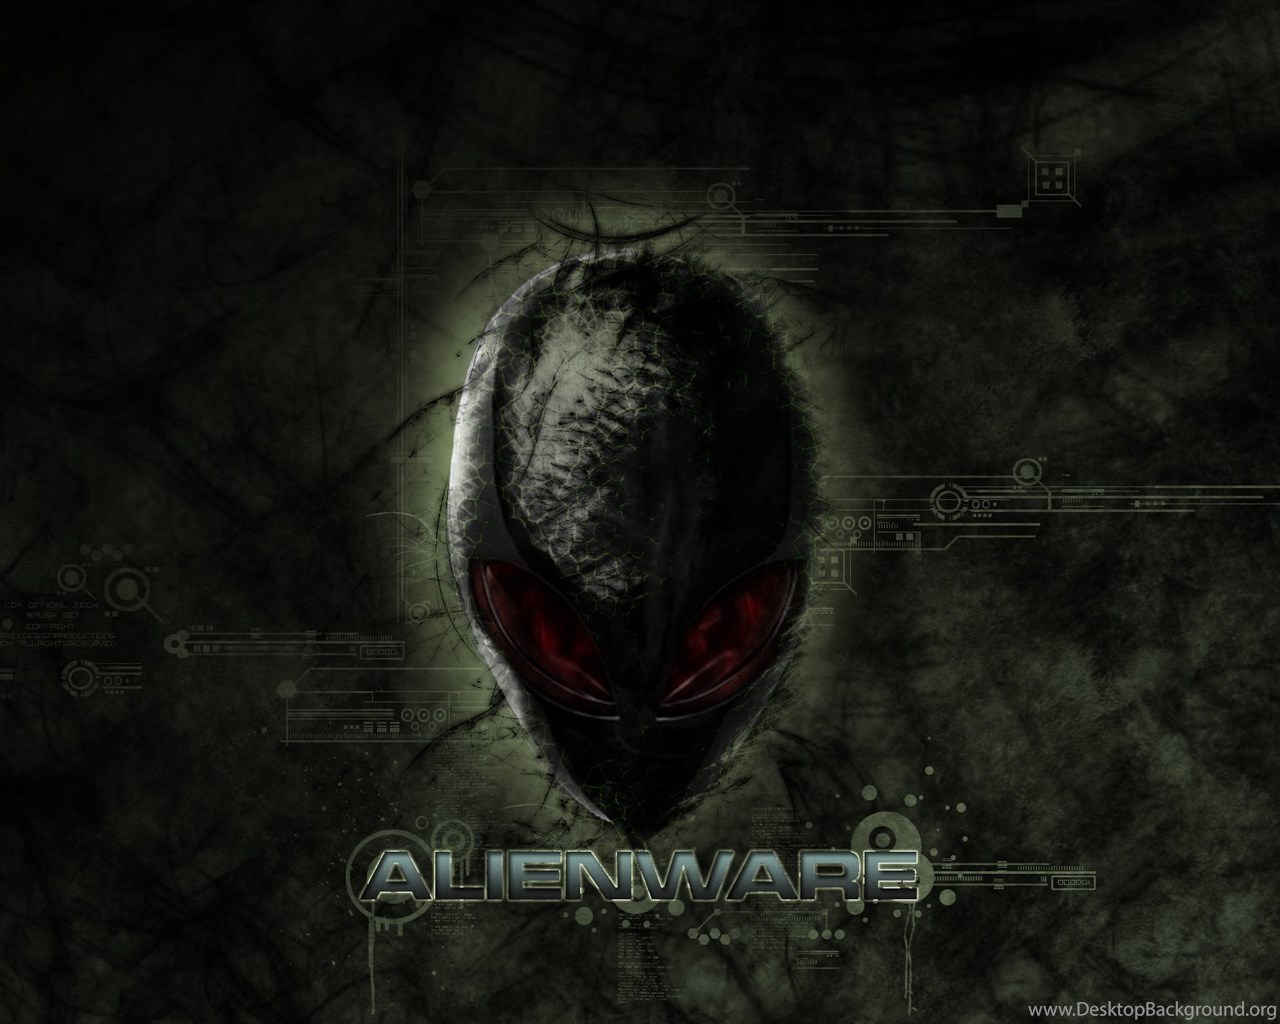 Download Alienware Wallpapers 7714 1920x1200 Px High Resolution